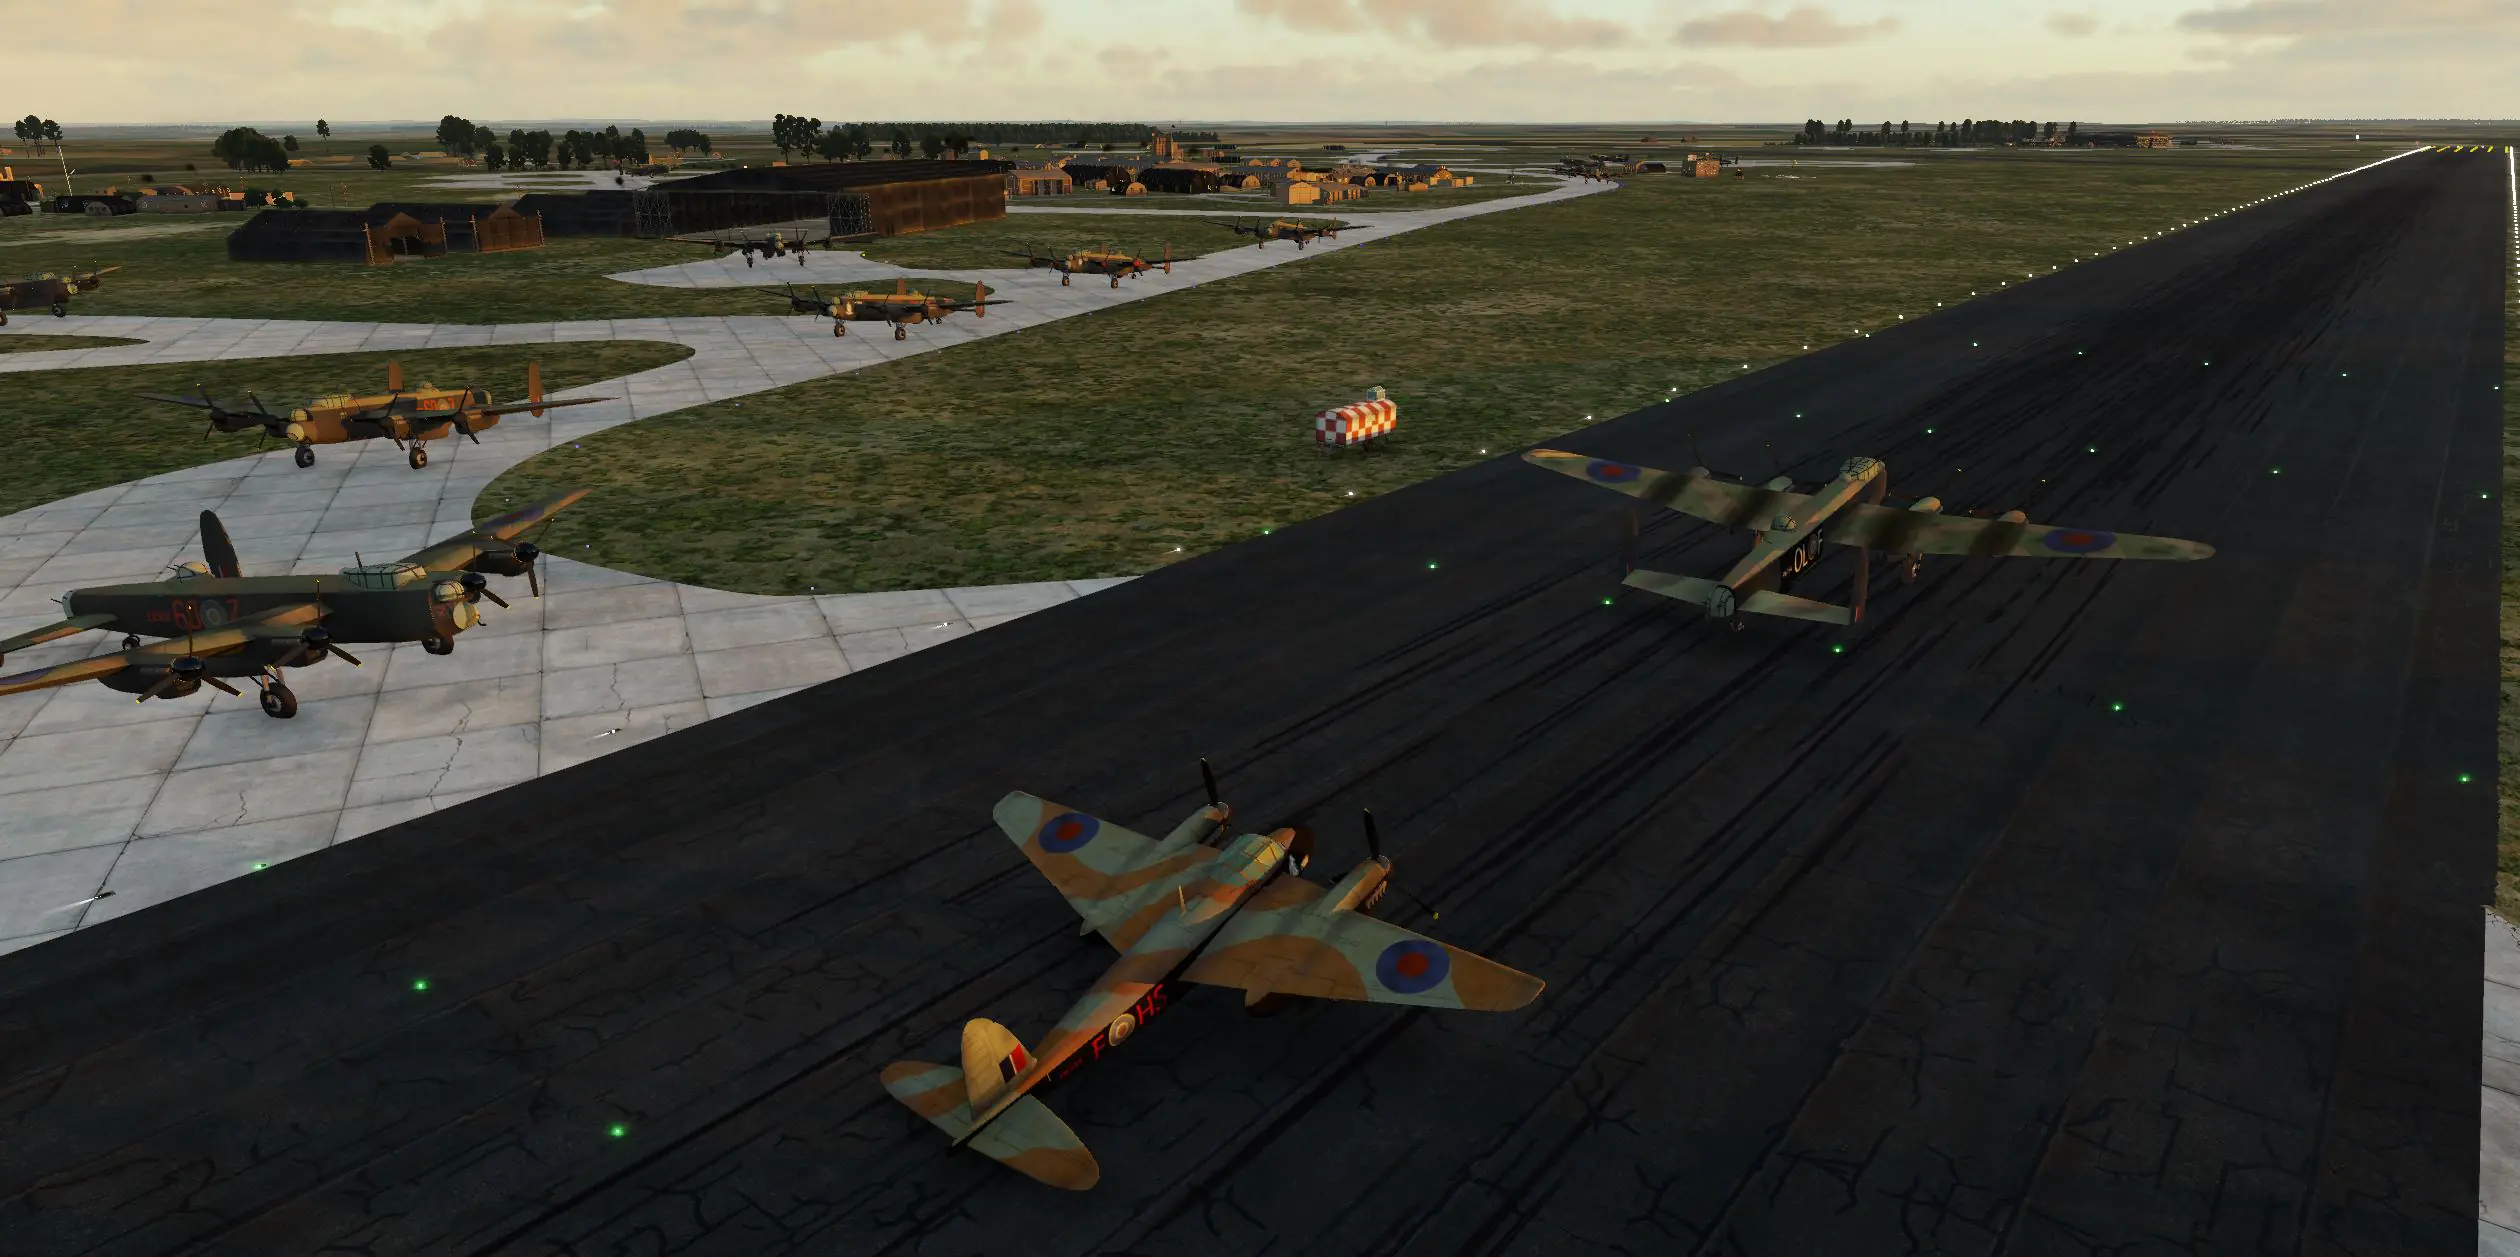 A CGI image of a wartime runway system with Lancaster Bomber aircraft.